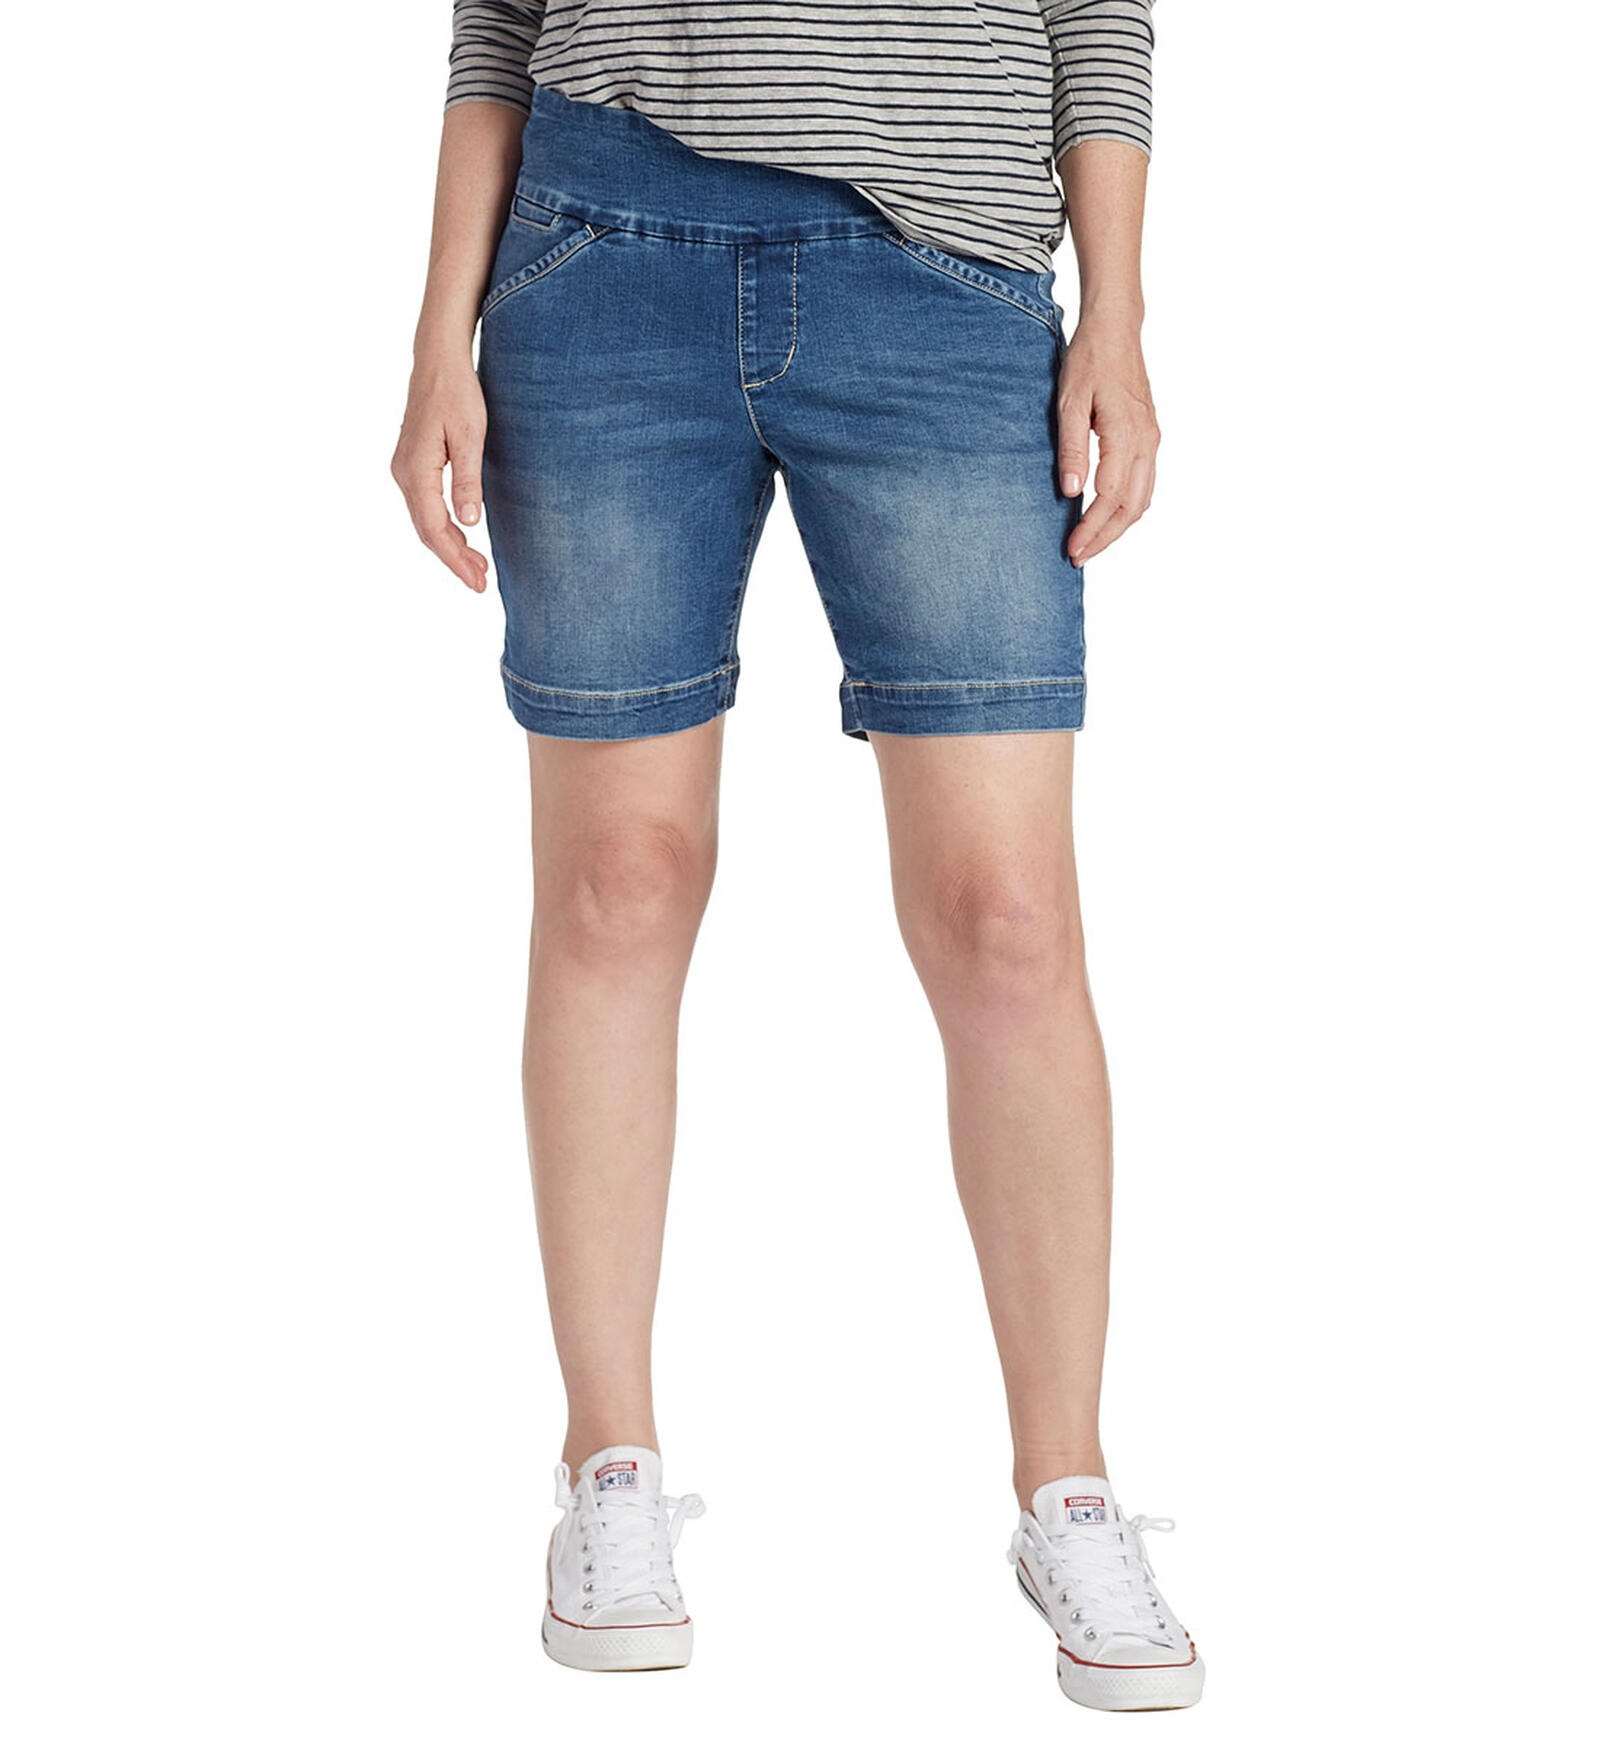 Buy Ainsley 8'' Short for USD 17.00 | Jag Jeans US New